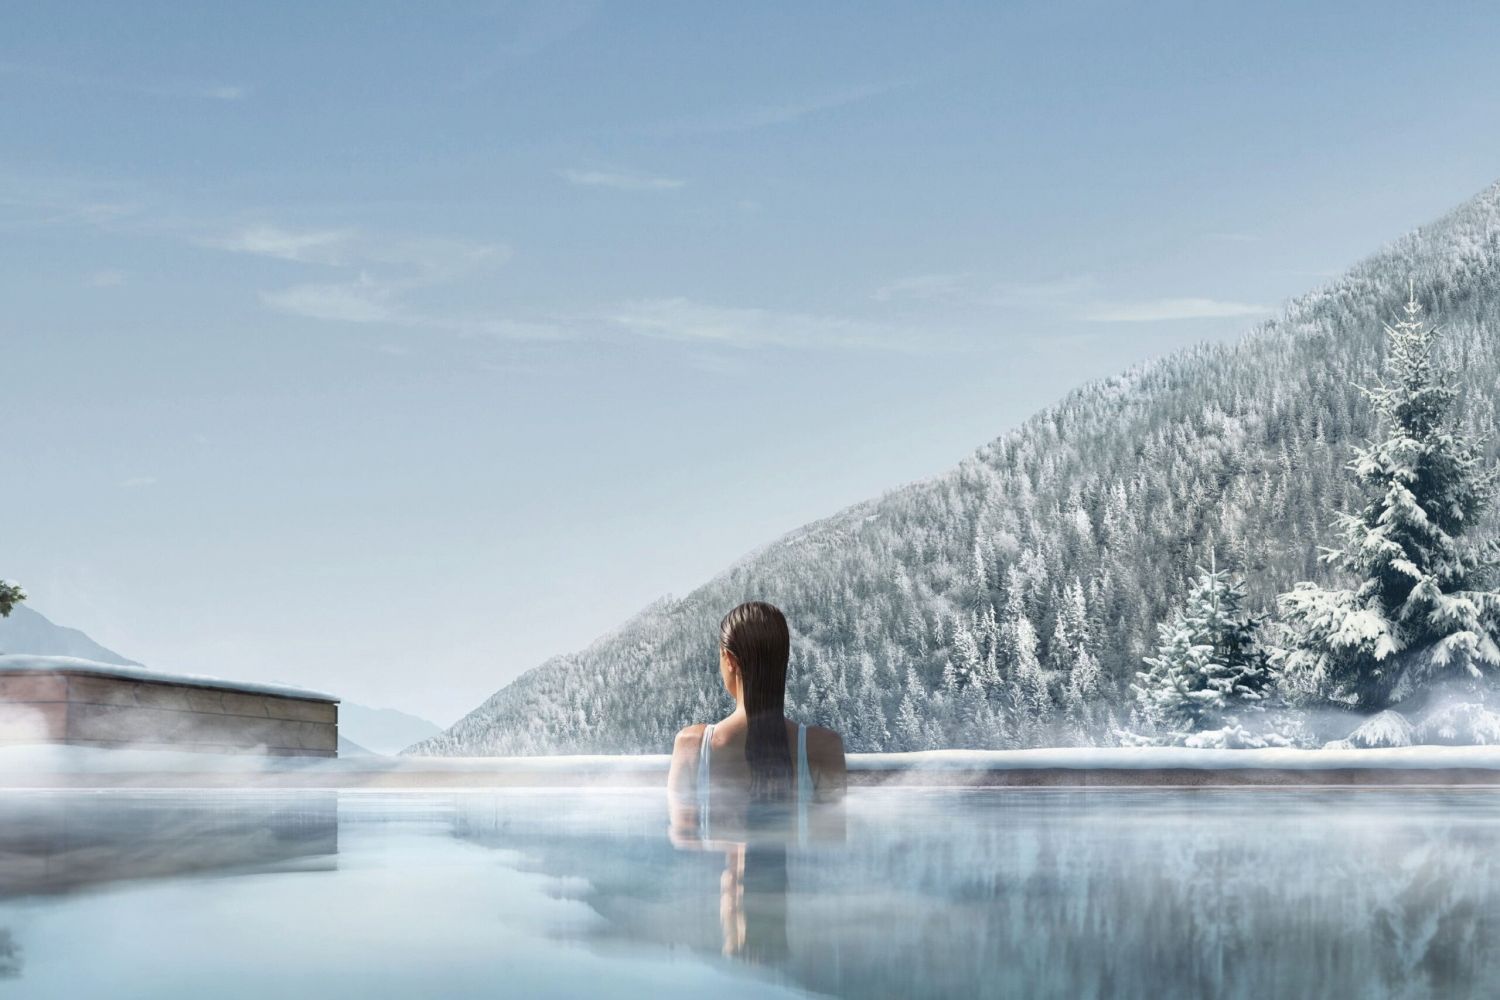 Indoor-outdoor pool overlooking view in at Lefay Dolomiti Resort and Spa - Pinzolo, Italy